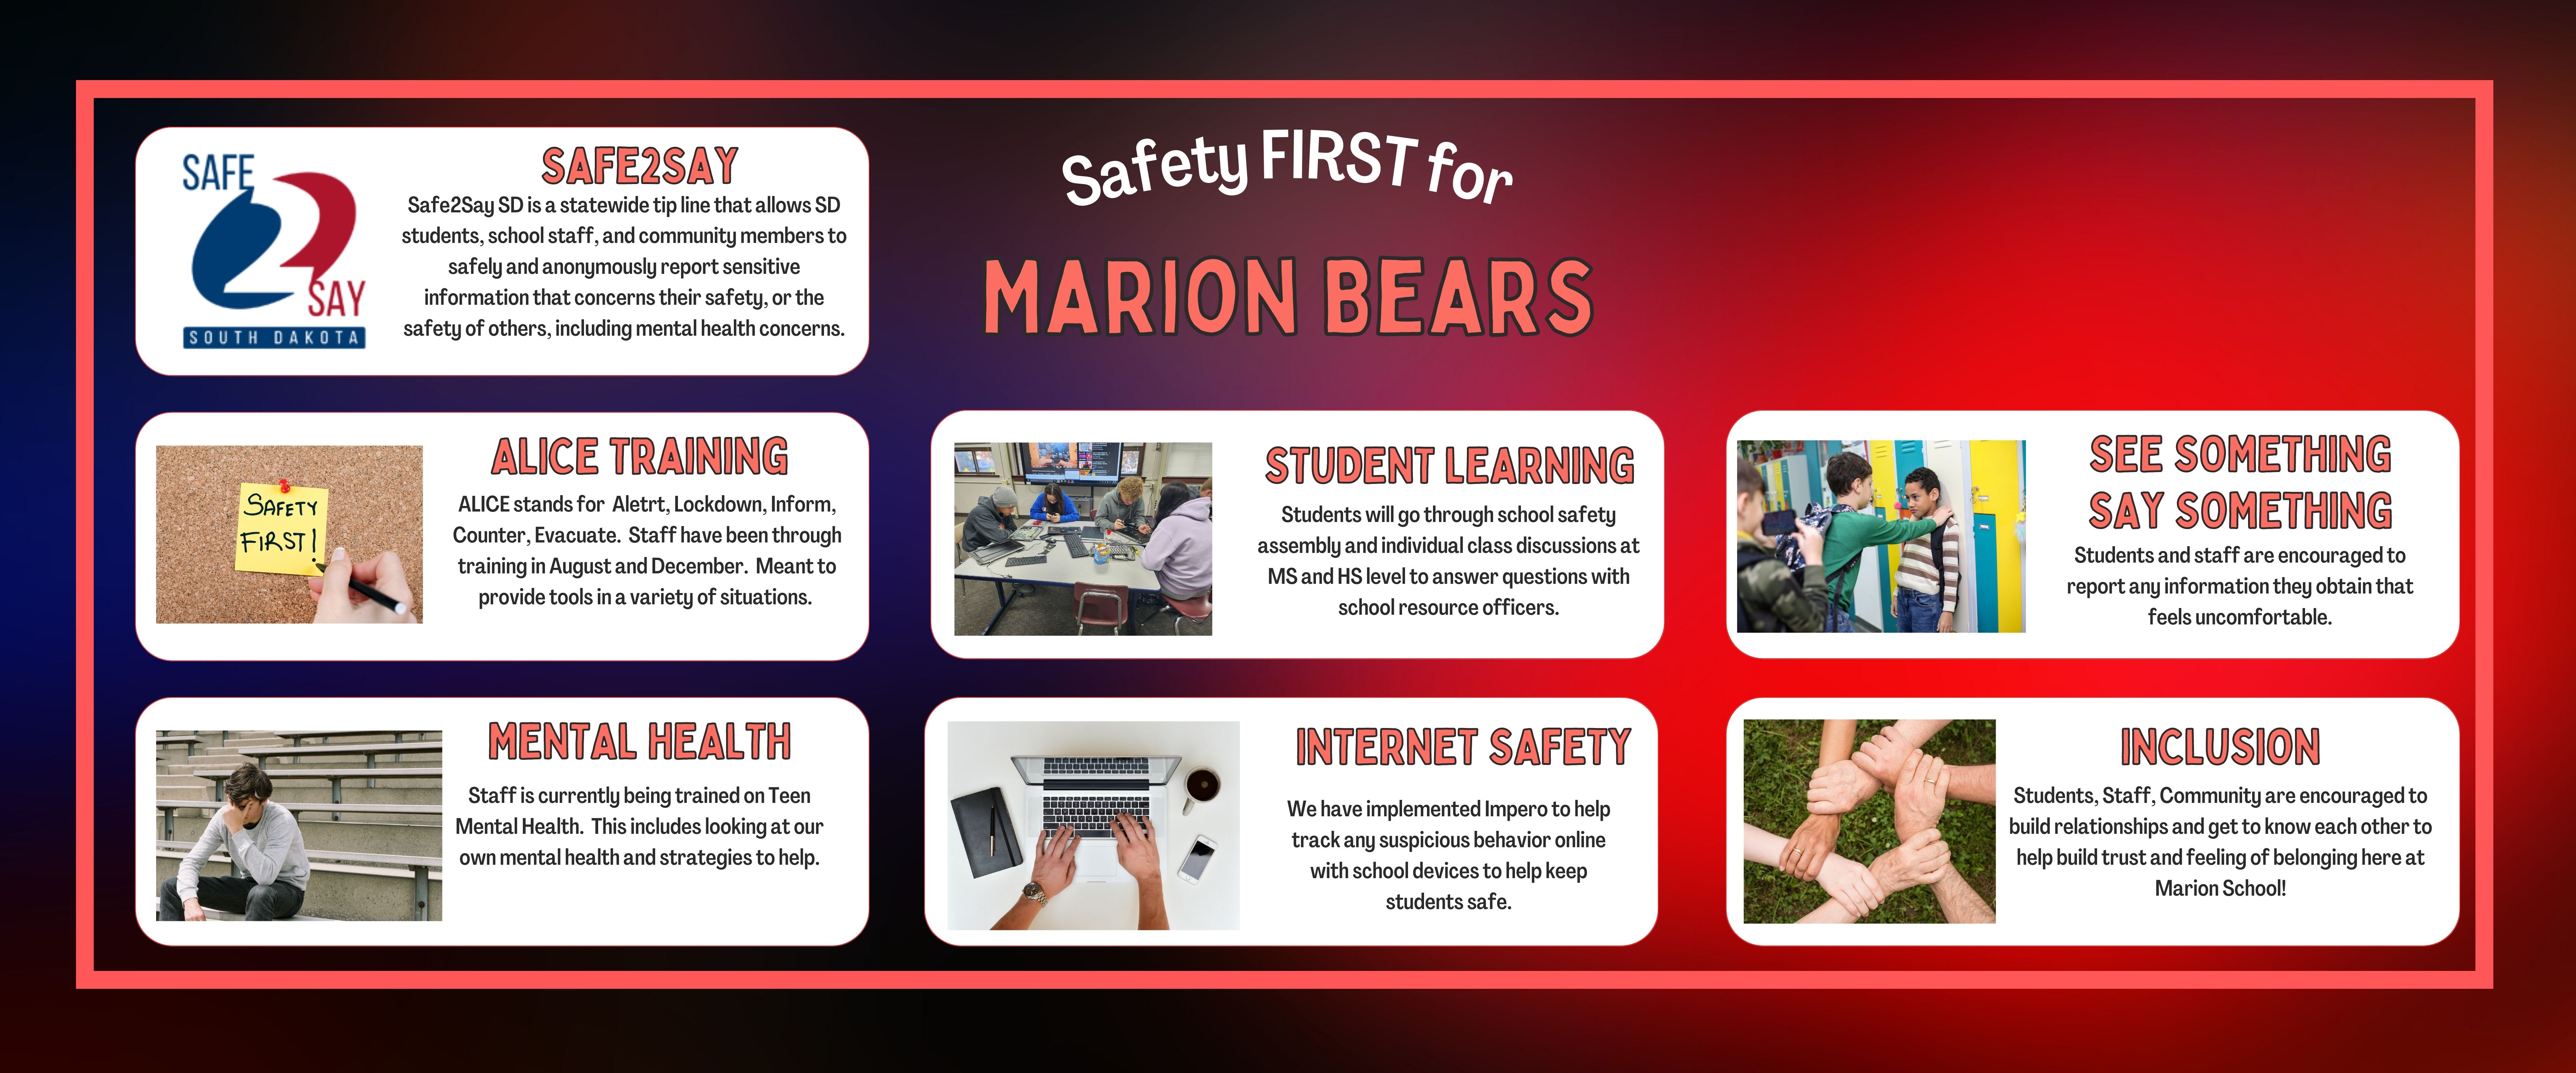 Marion Safety First Poster